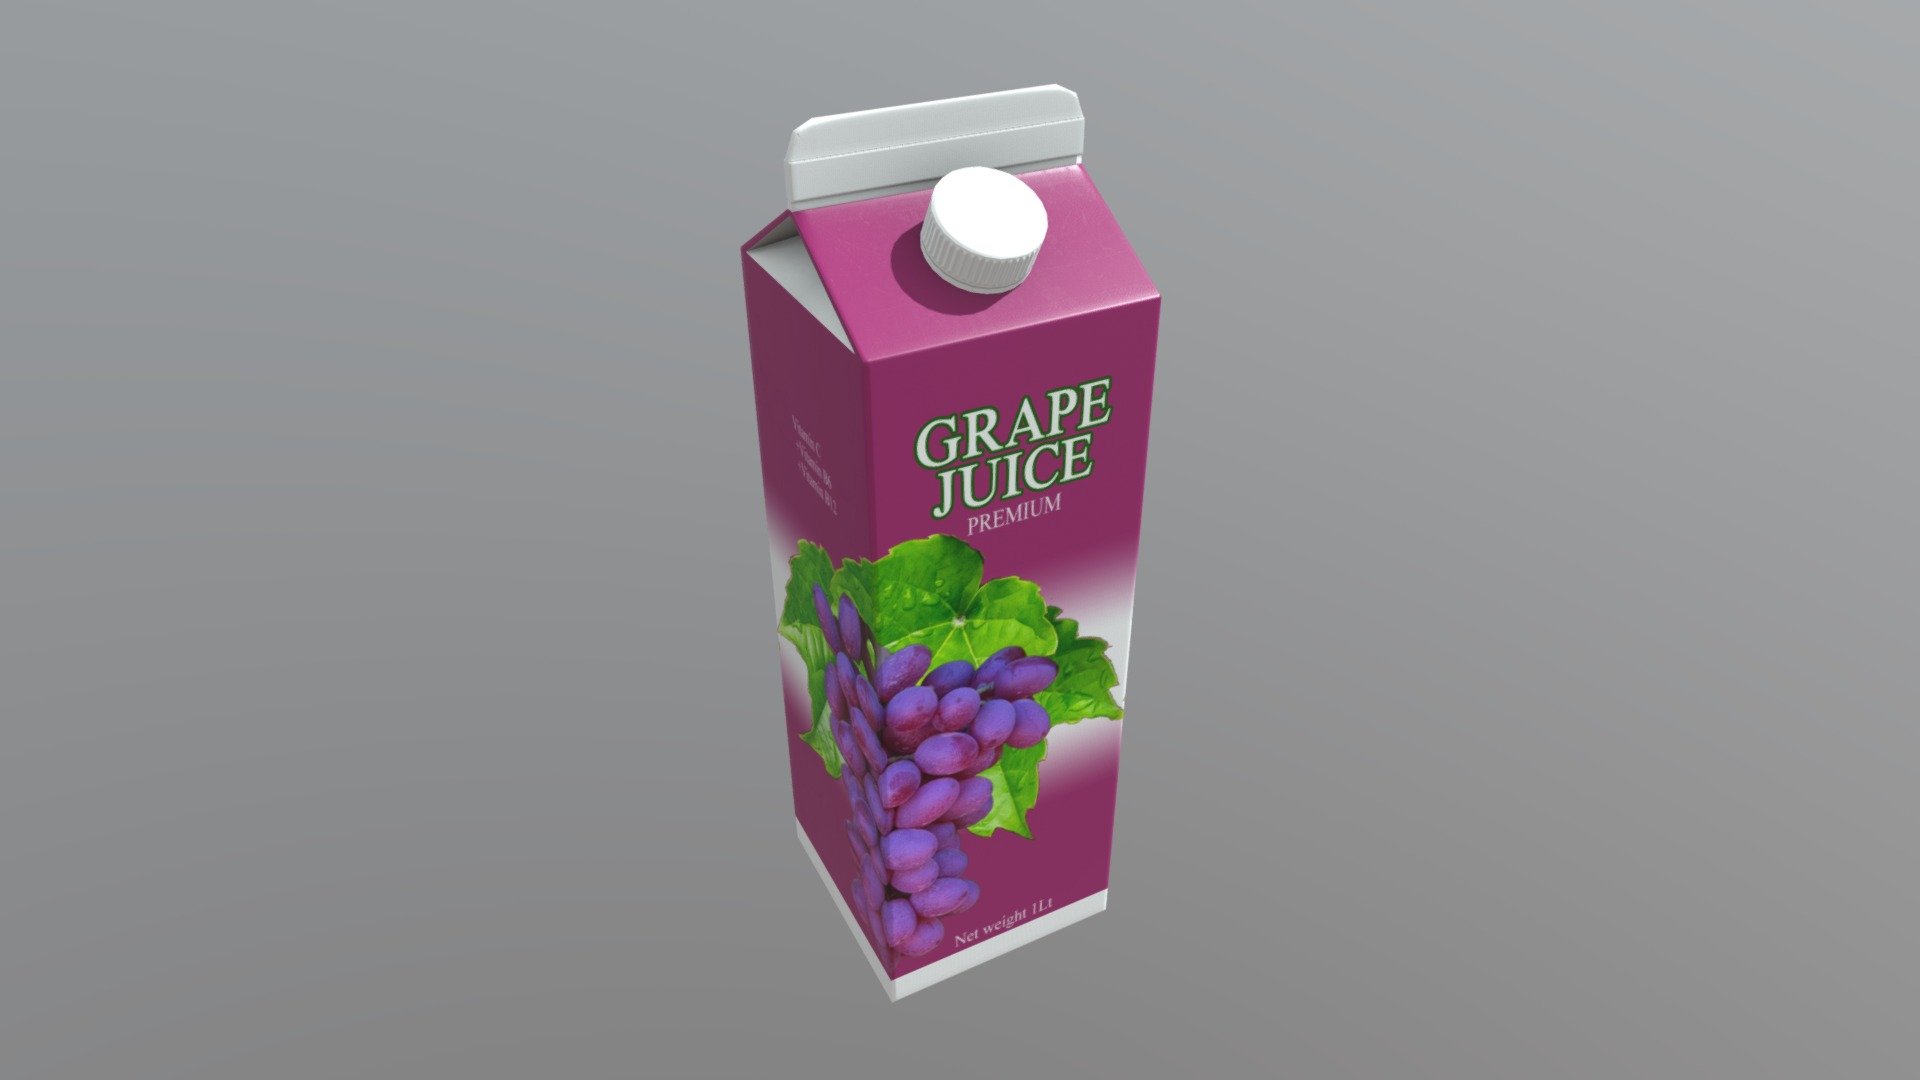 &lsquo;This Grape is great, try it now or later.' Includes x2048 PBR textures. The normal map is baked from the high poly model.

If you need help with this model or have a question – please do not hesitate to contact with me. I will be happy to help you.

Contact: plaggy.net@gmail.com - Grape Juice - Buy Royalty Free 3D model by plaggy 3d model